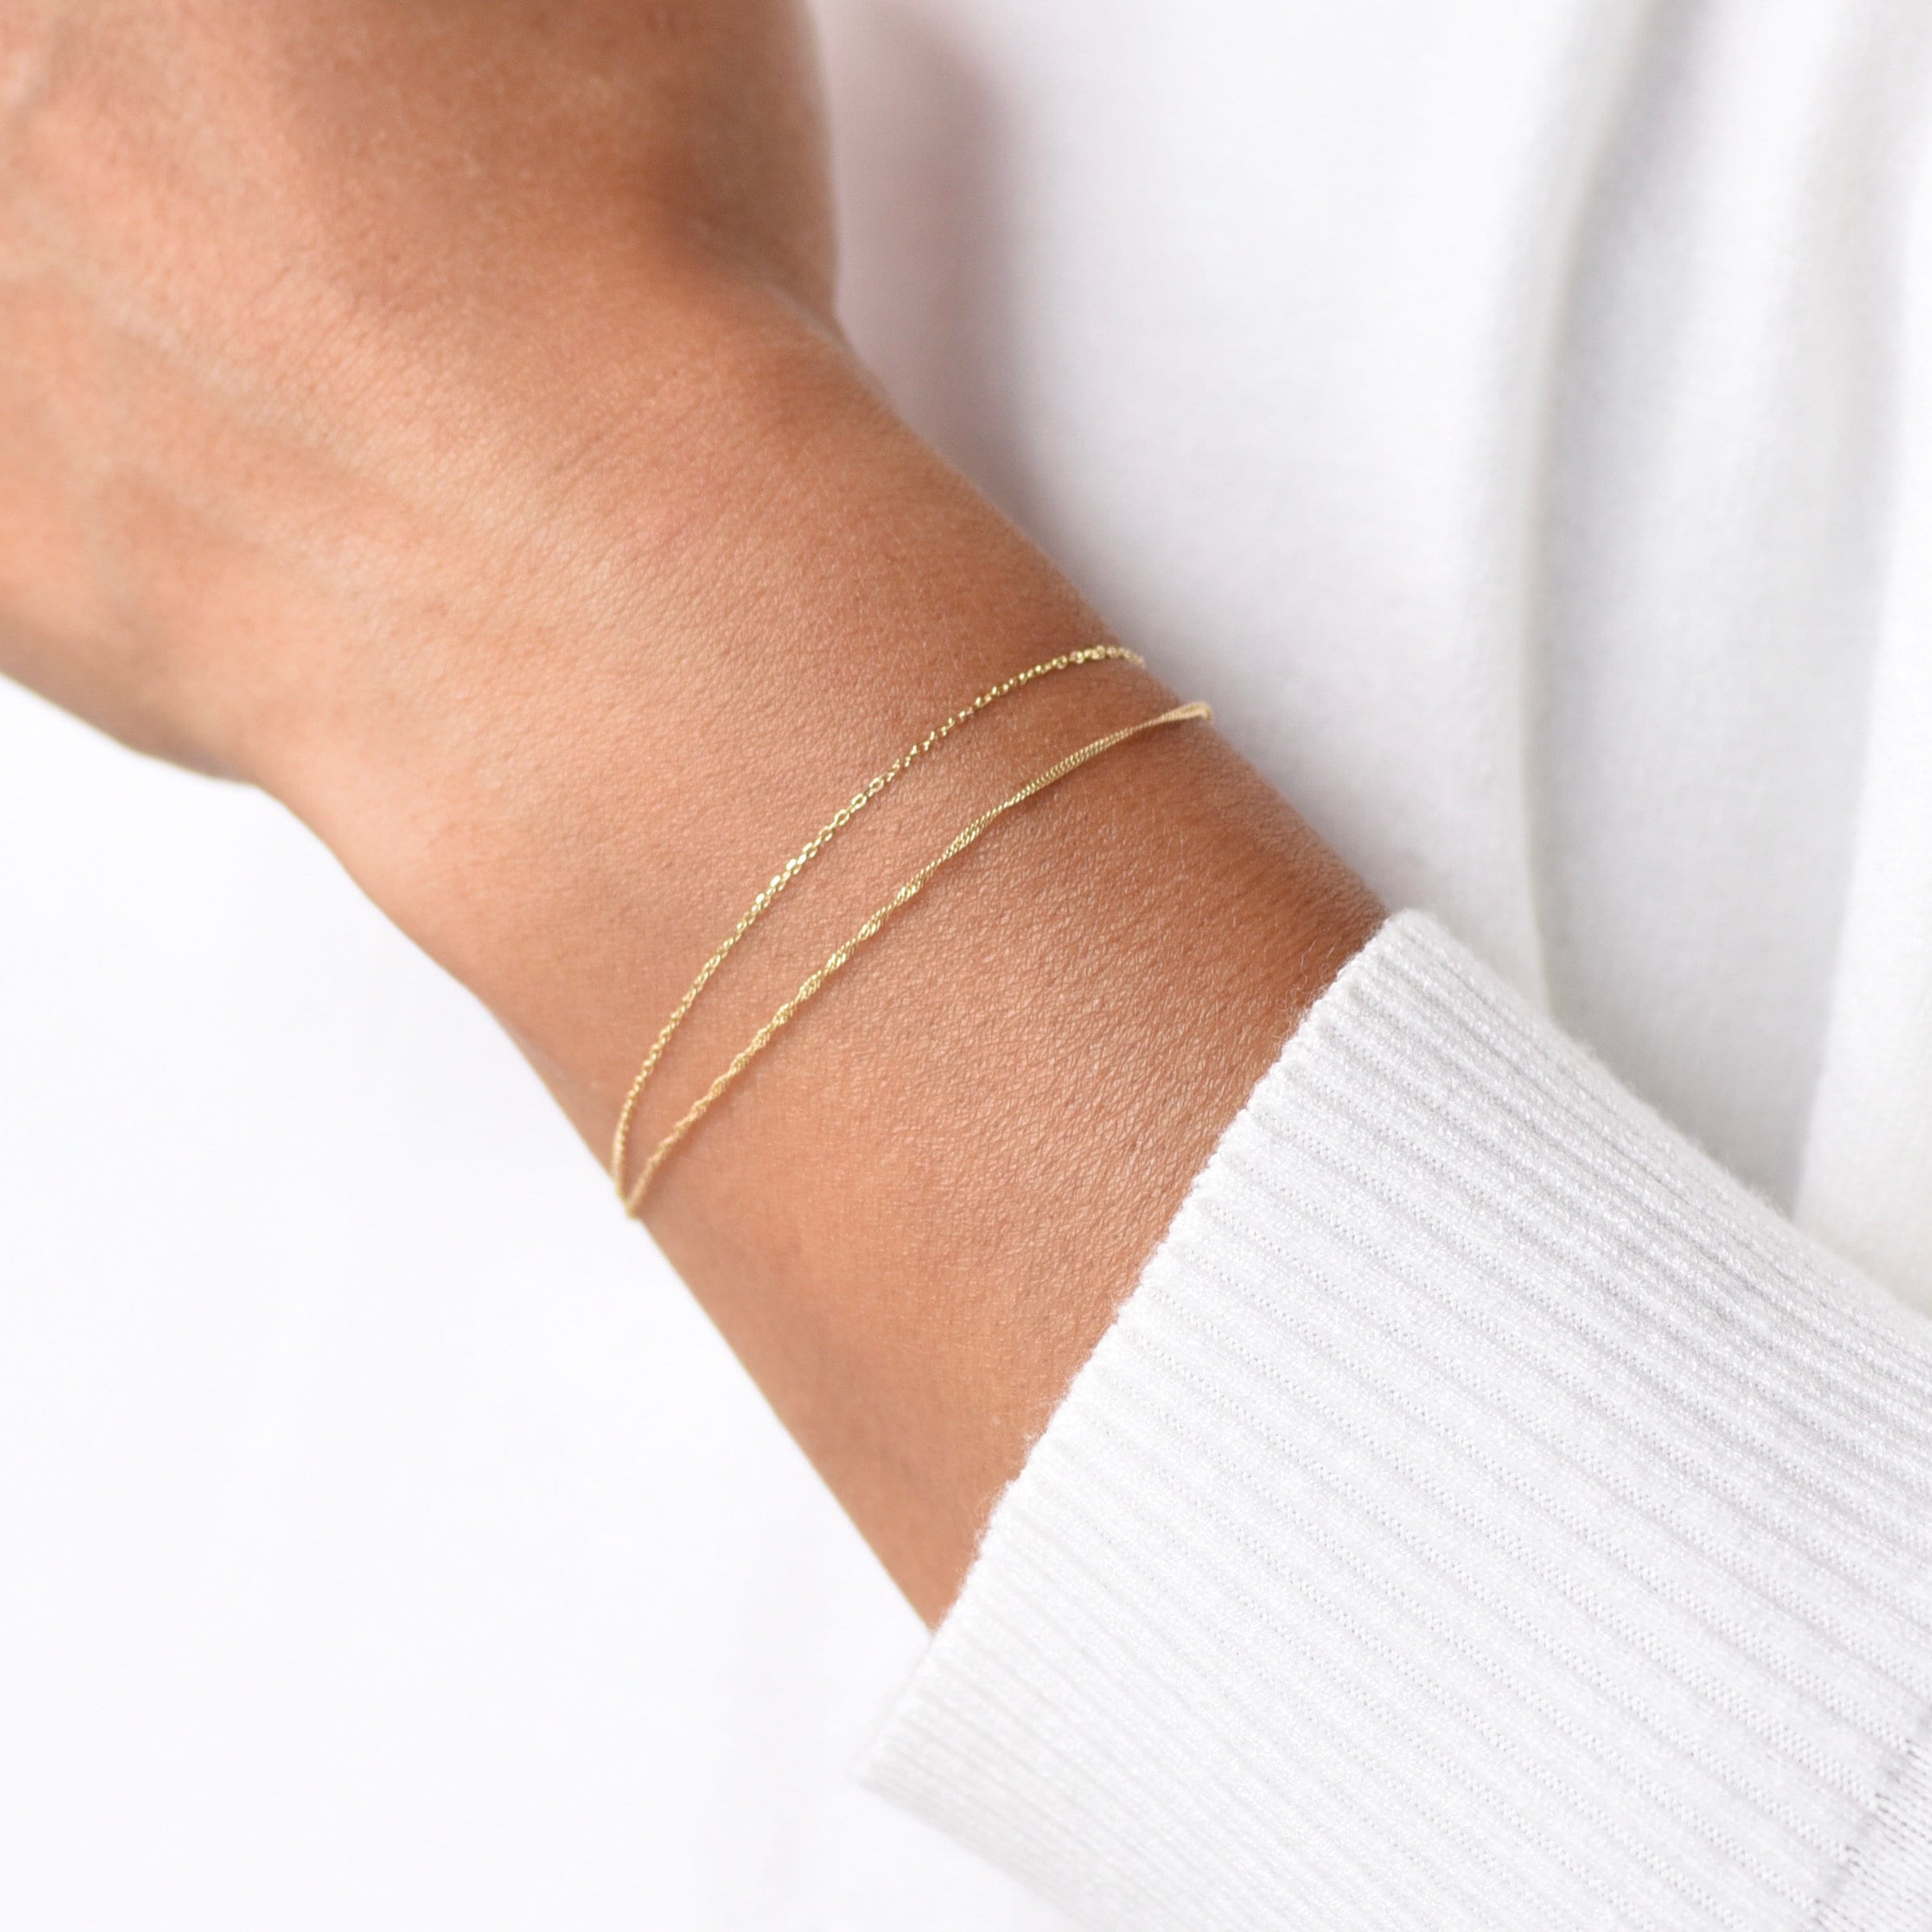 Dainty Double Chain Bracelet in Solid 14K Gold 7 inch / 14K Yellow Gold